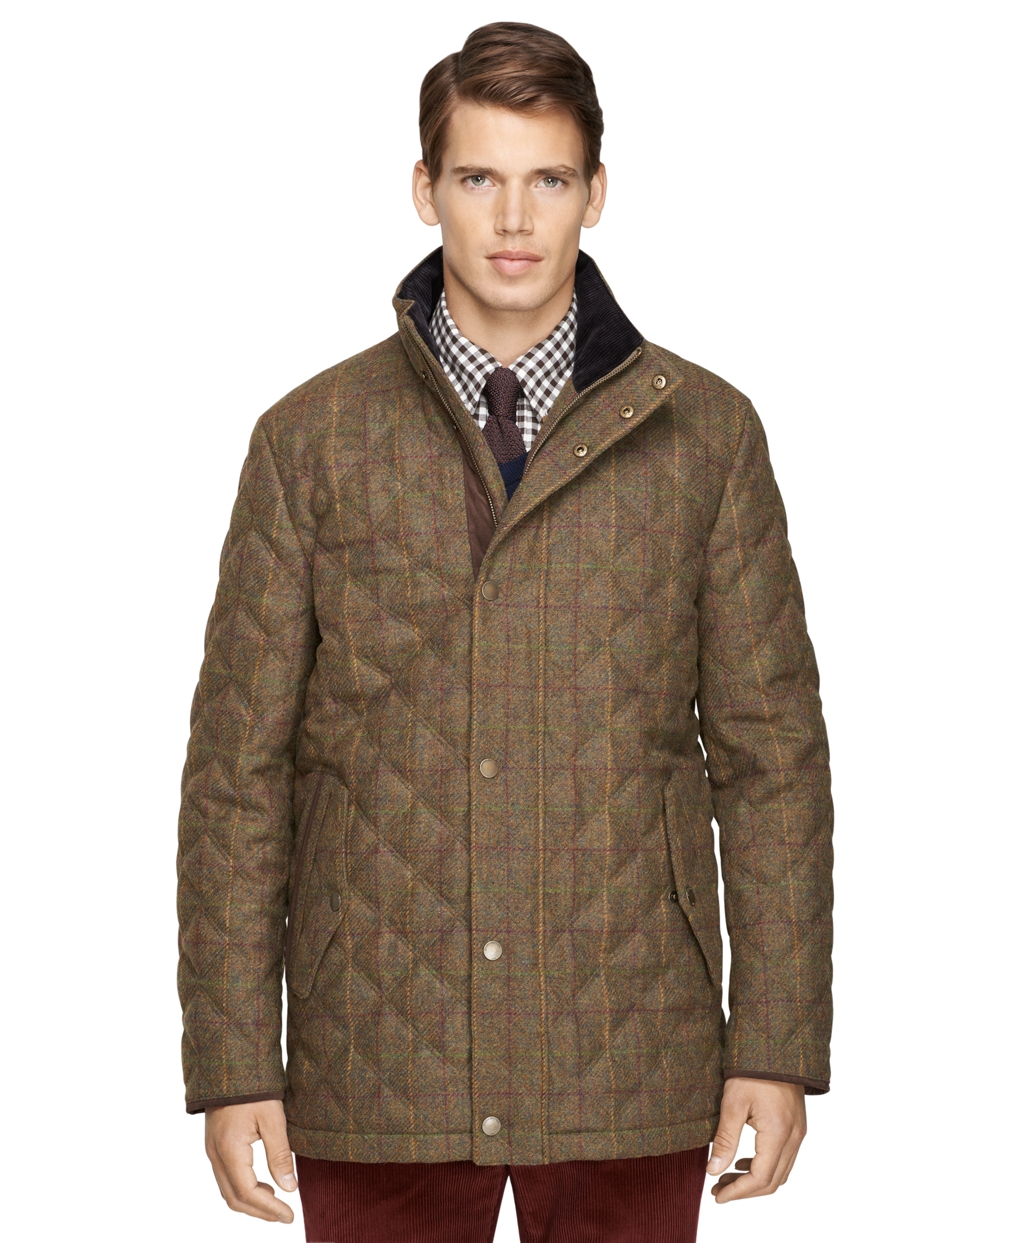 Lyst - Brooks Brothers Tattersall Diamond Quilted Jacket in Green for Men